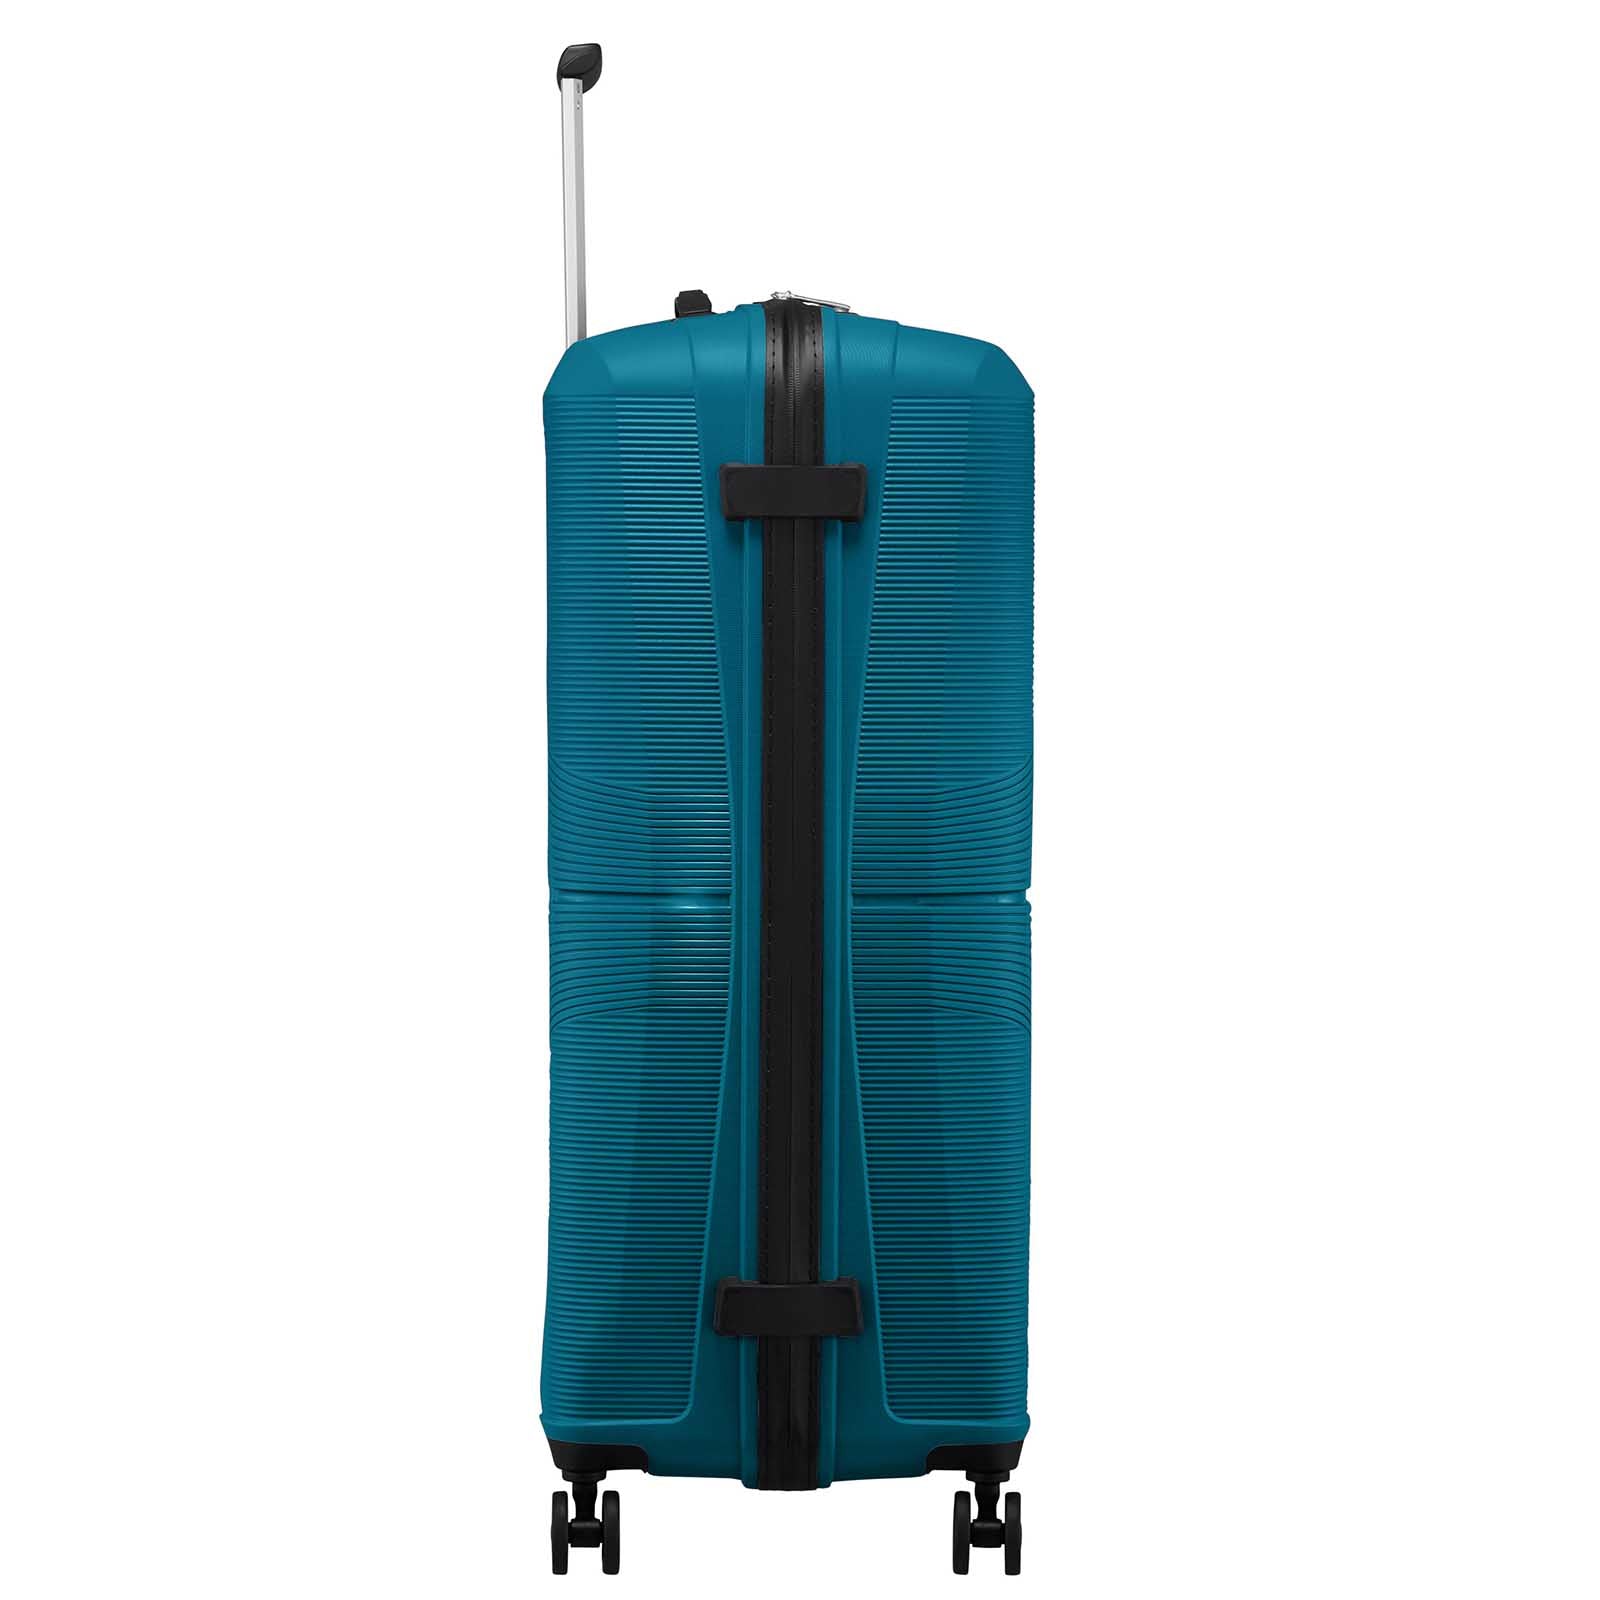 American-Tourister-Airconic-77cm-Suitcase-Deep-Ocean-Side-LH